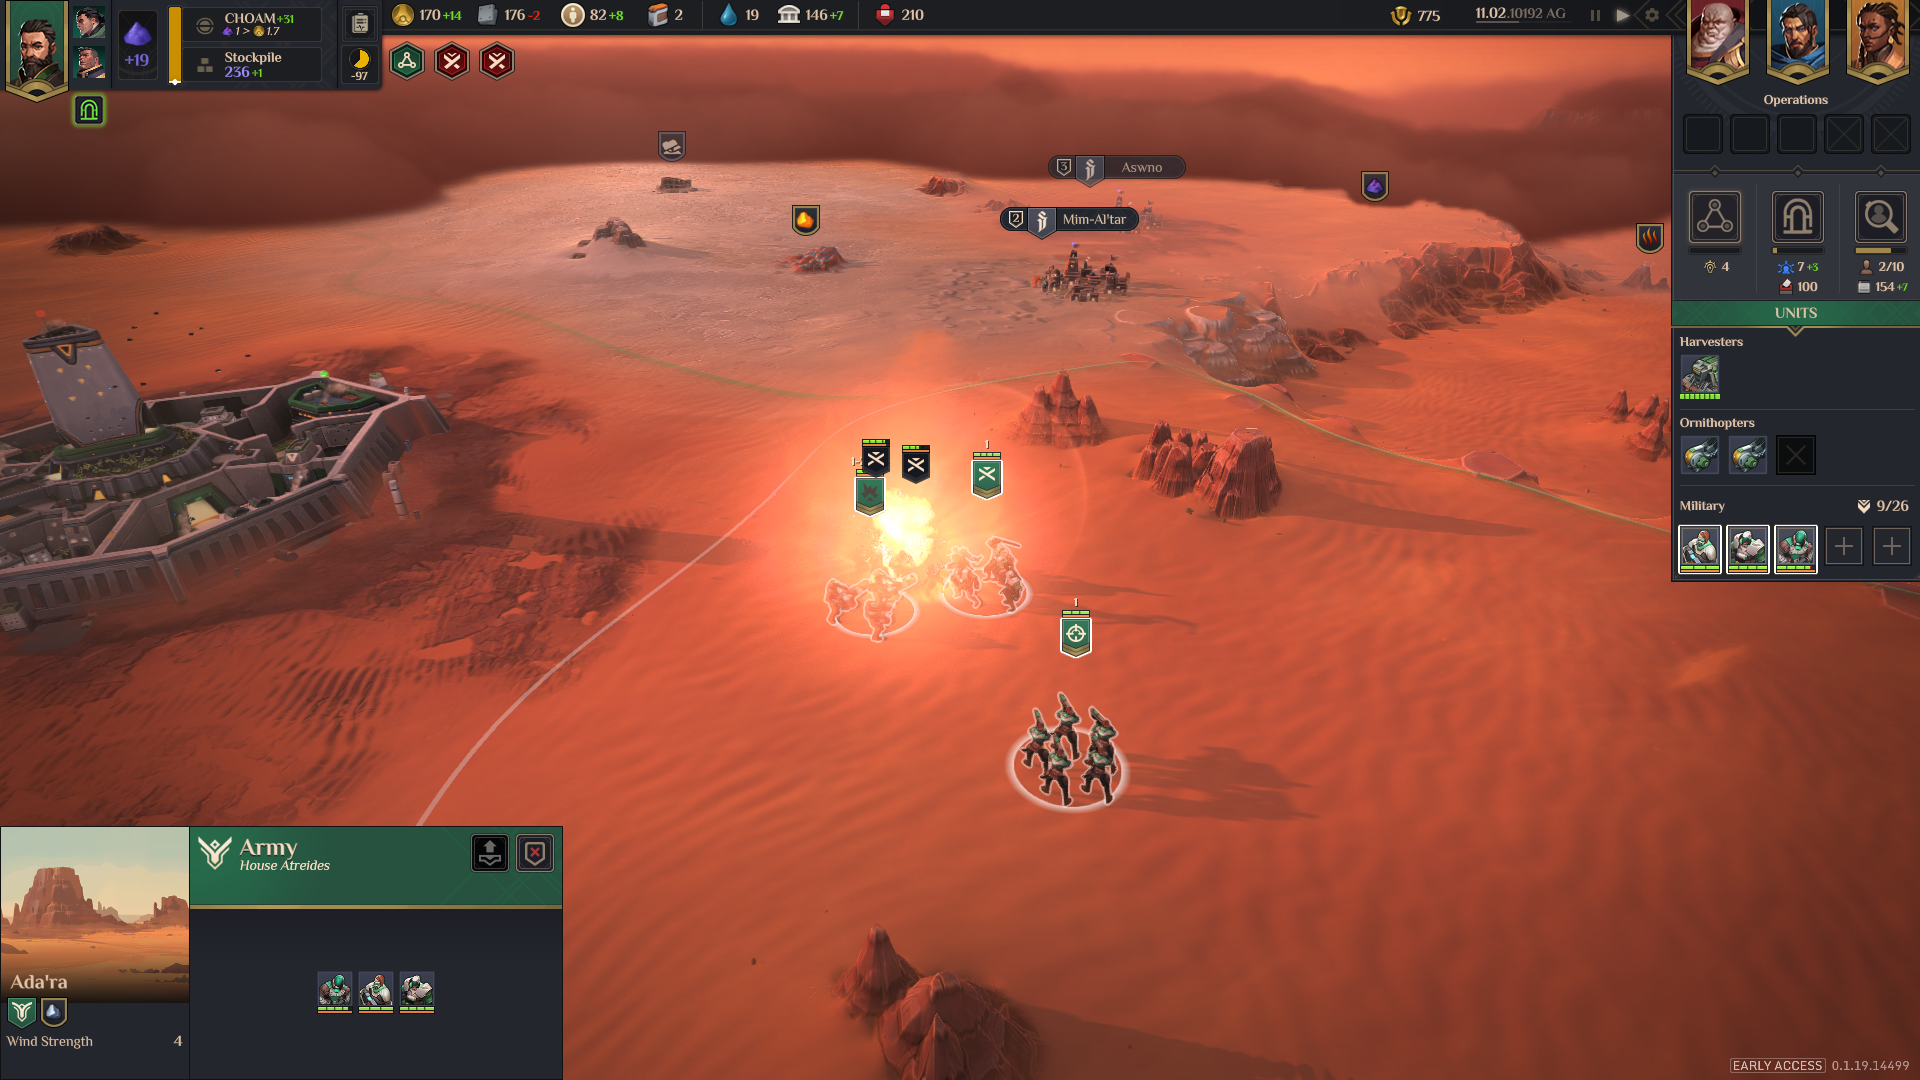 Dune: Spice Wars Review [PC] - A Genius 4x Game That Merges RTS and Tabletop Gaming - The Illuminerdi